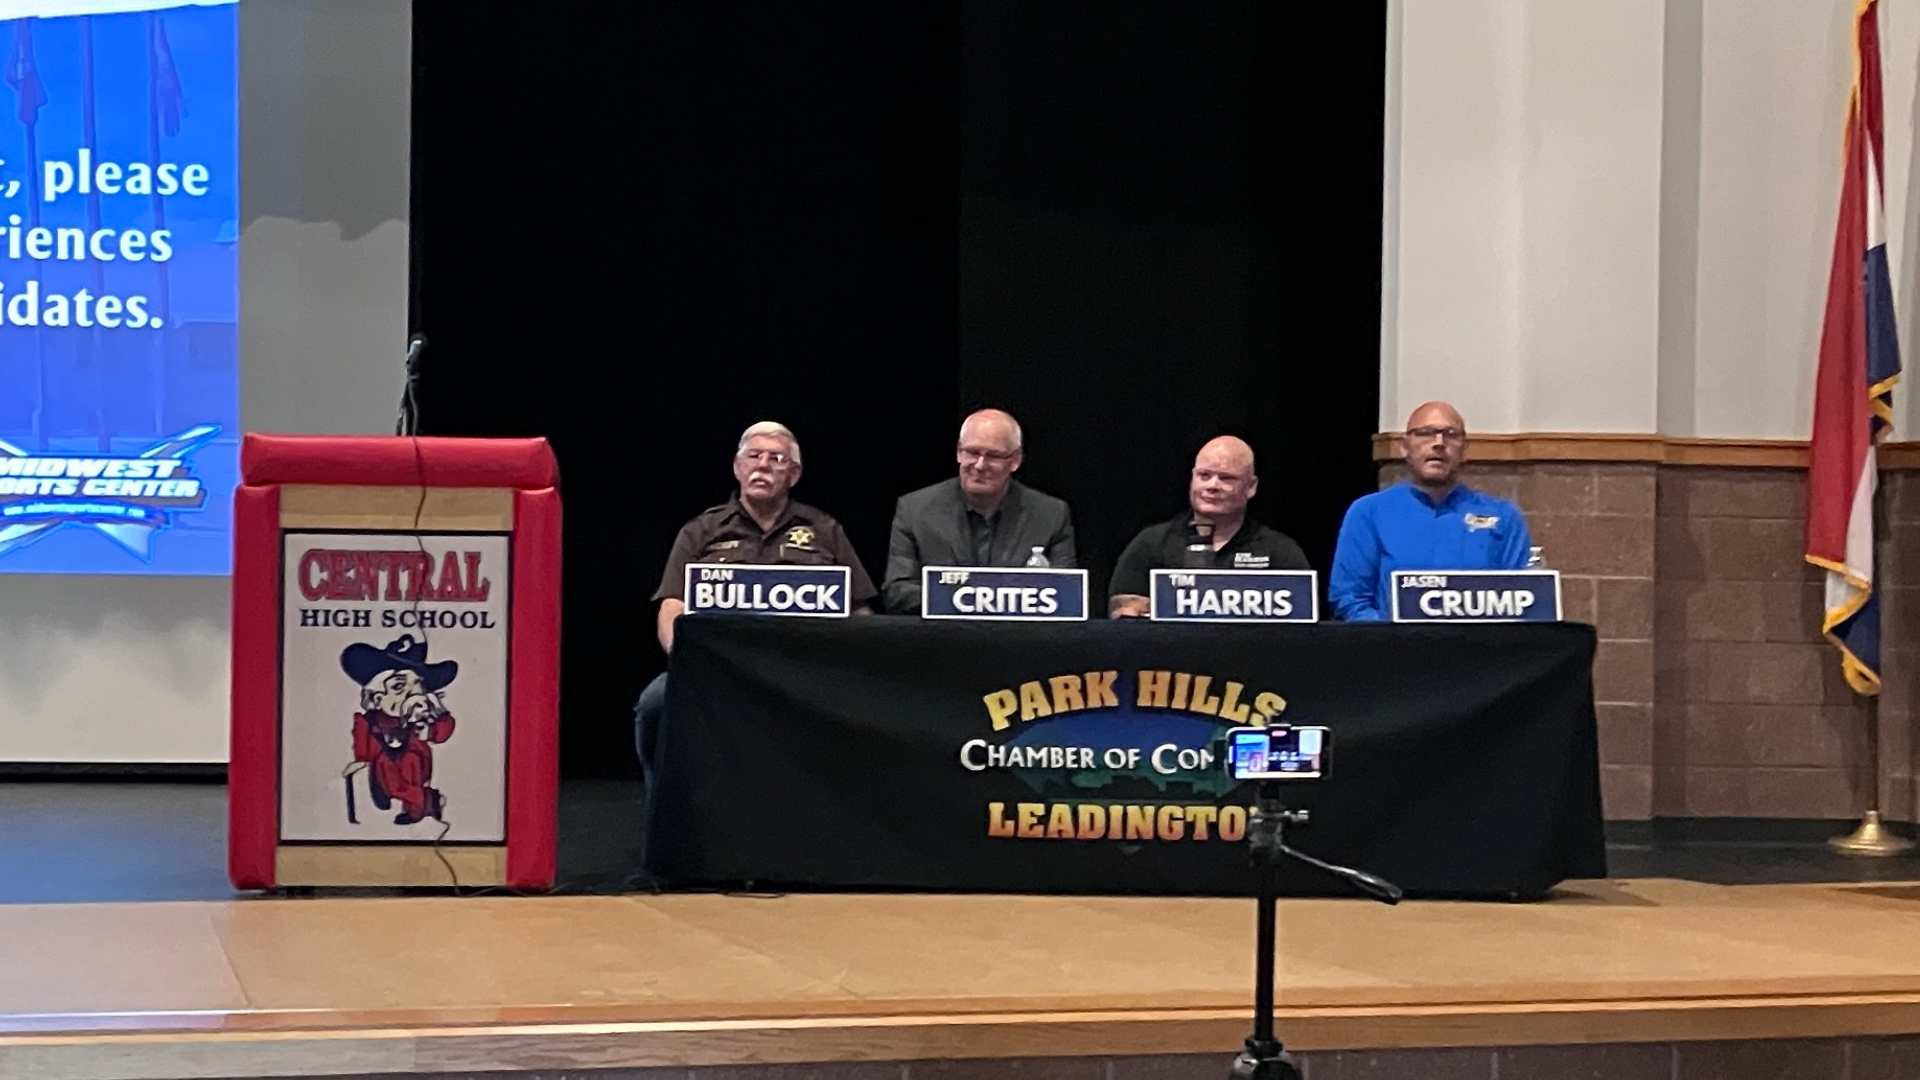 Sheriff Candidates Participate in Chamber Forum